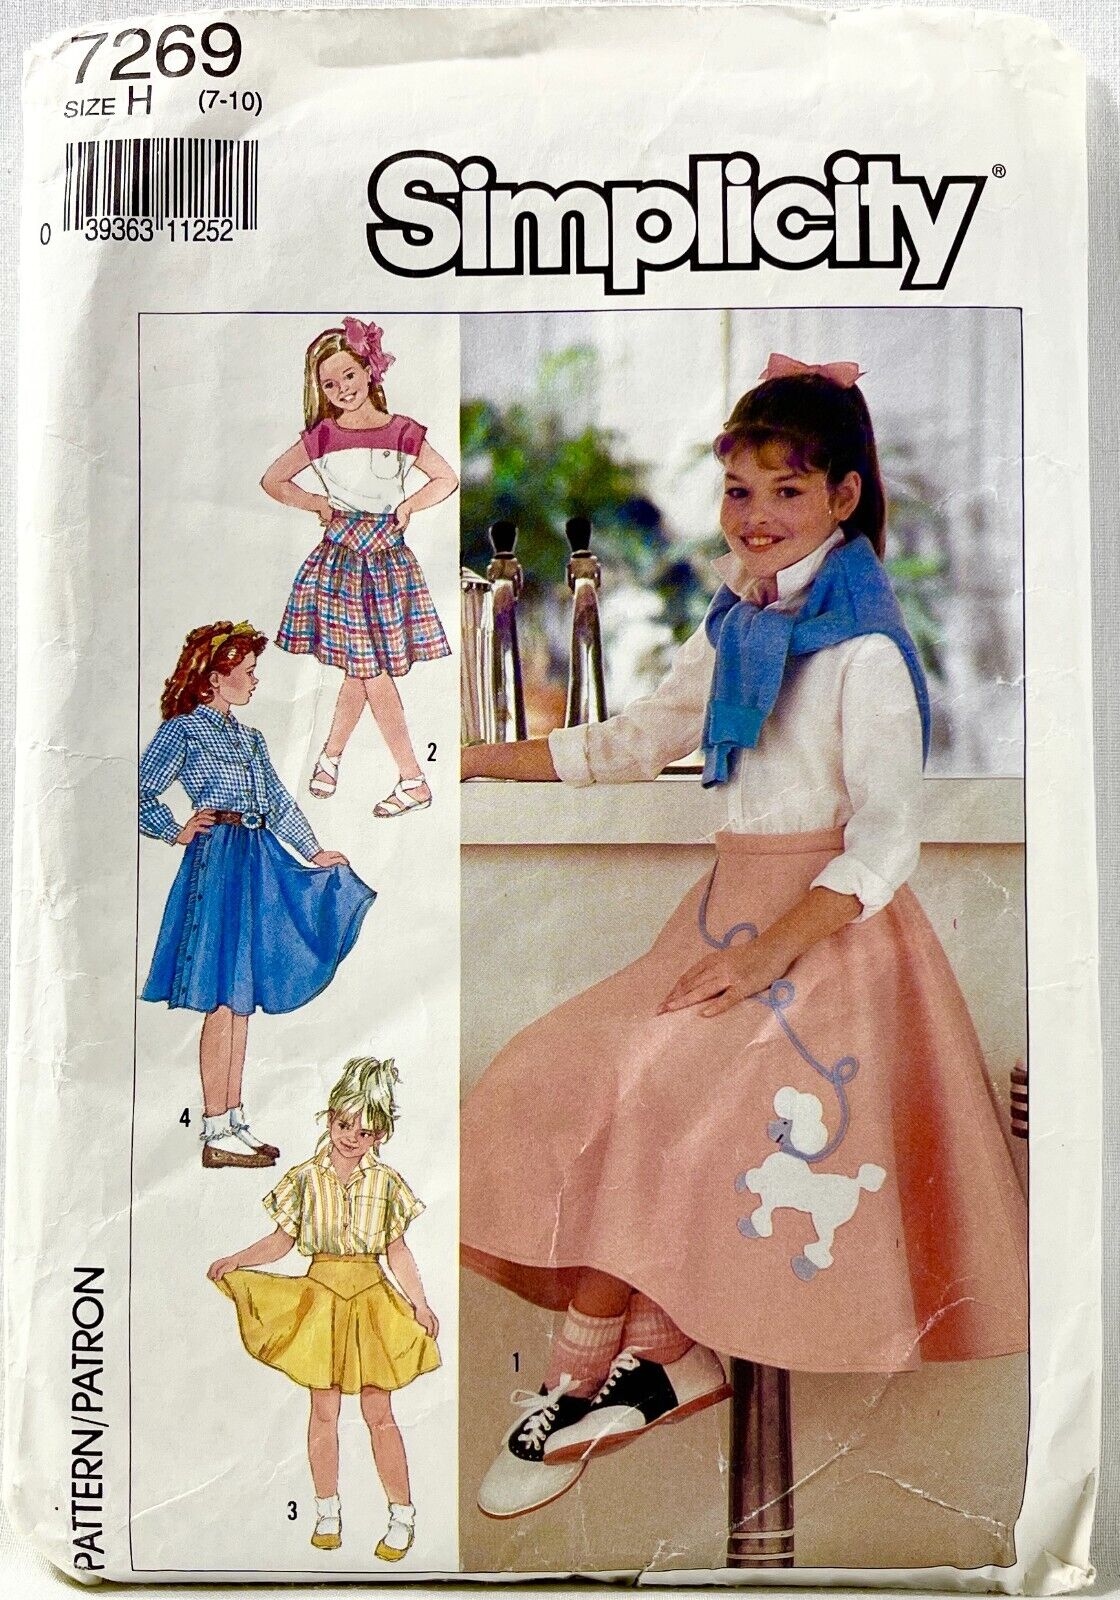 1991 Simplicity Sewing Pattern 7269 Girls Skirts 3 Lengths 4 Styles 7-10 14388